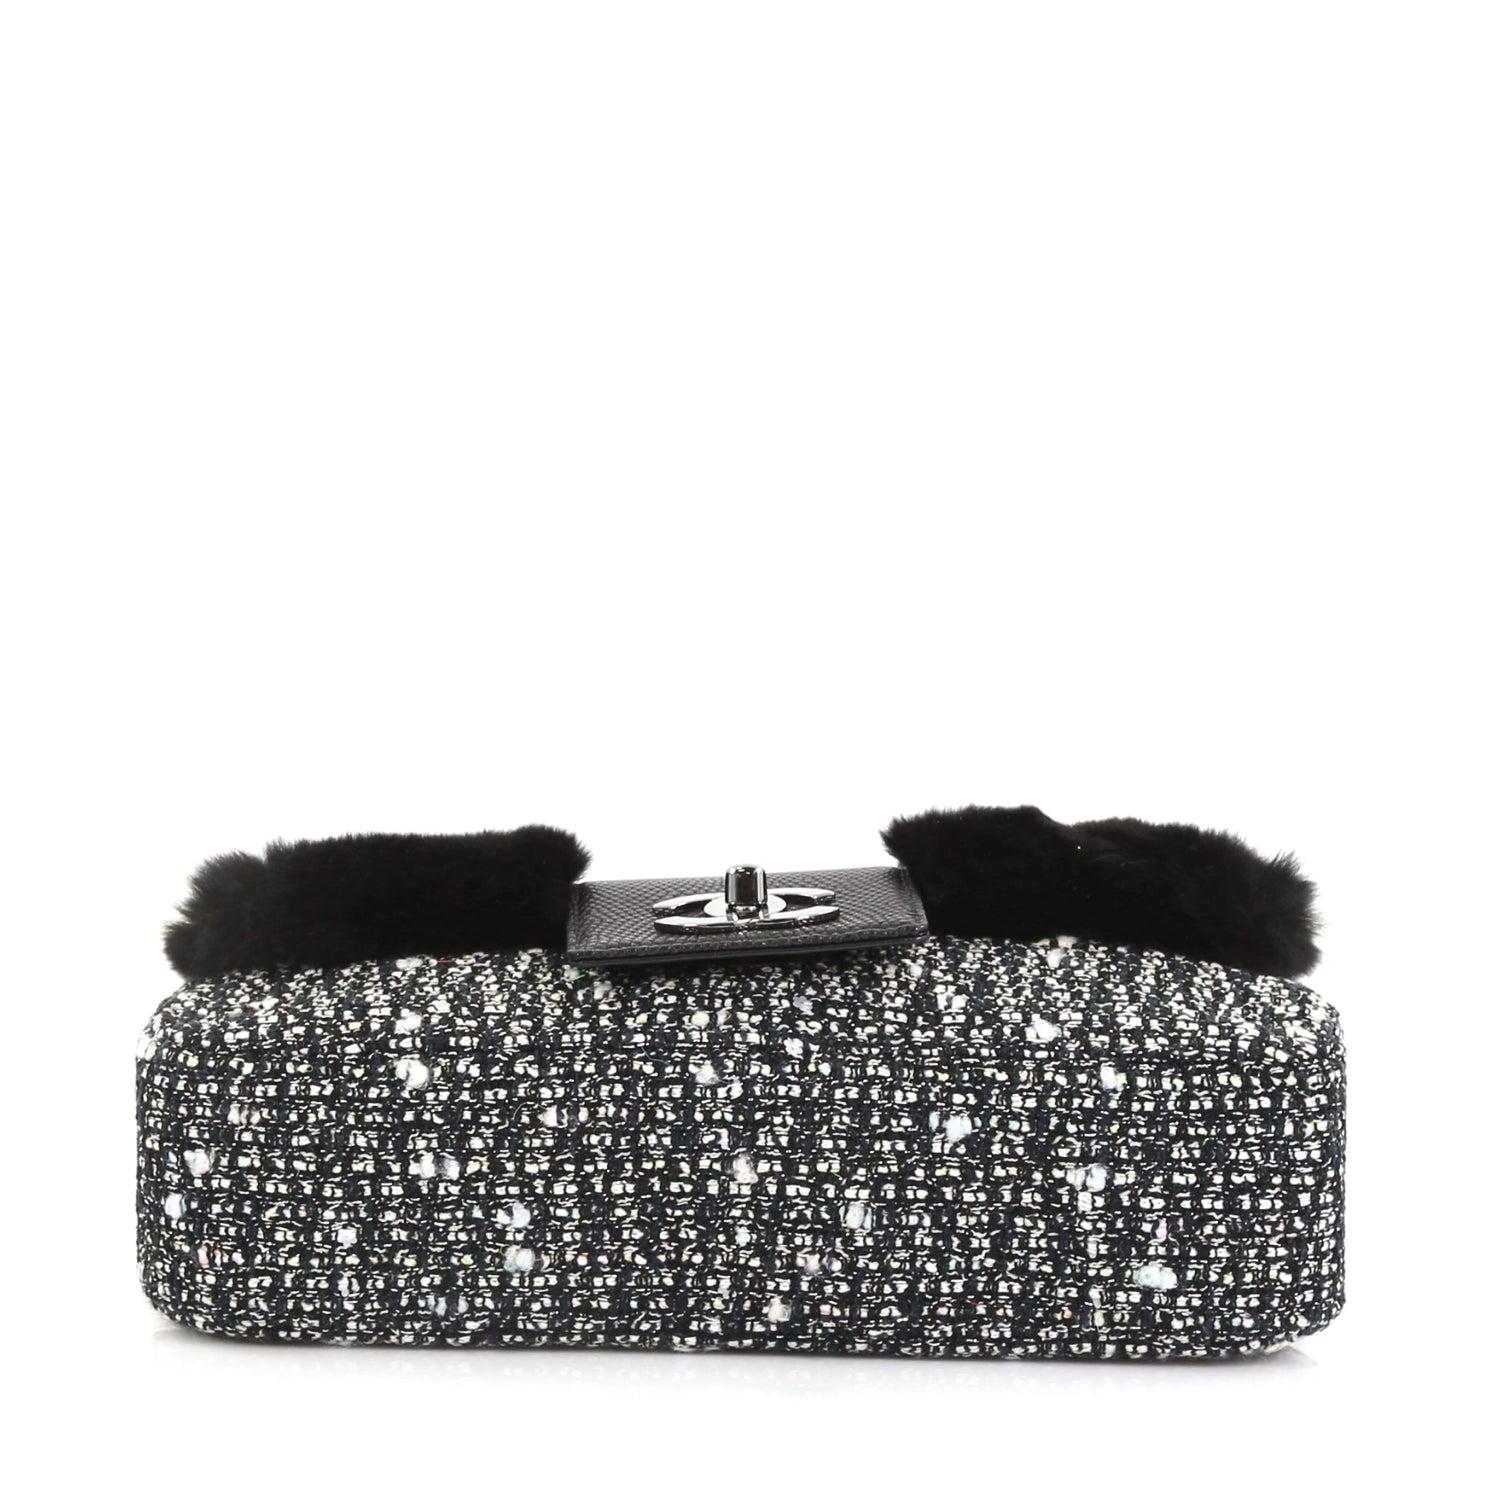 Chanel Classic Flap Limited Edition 2005 Black & White Grey Tweed Fur Lizard Bag For Sale 1